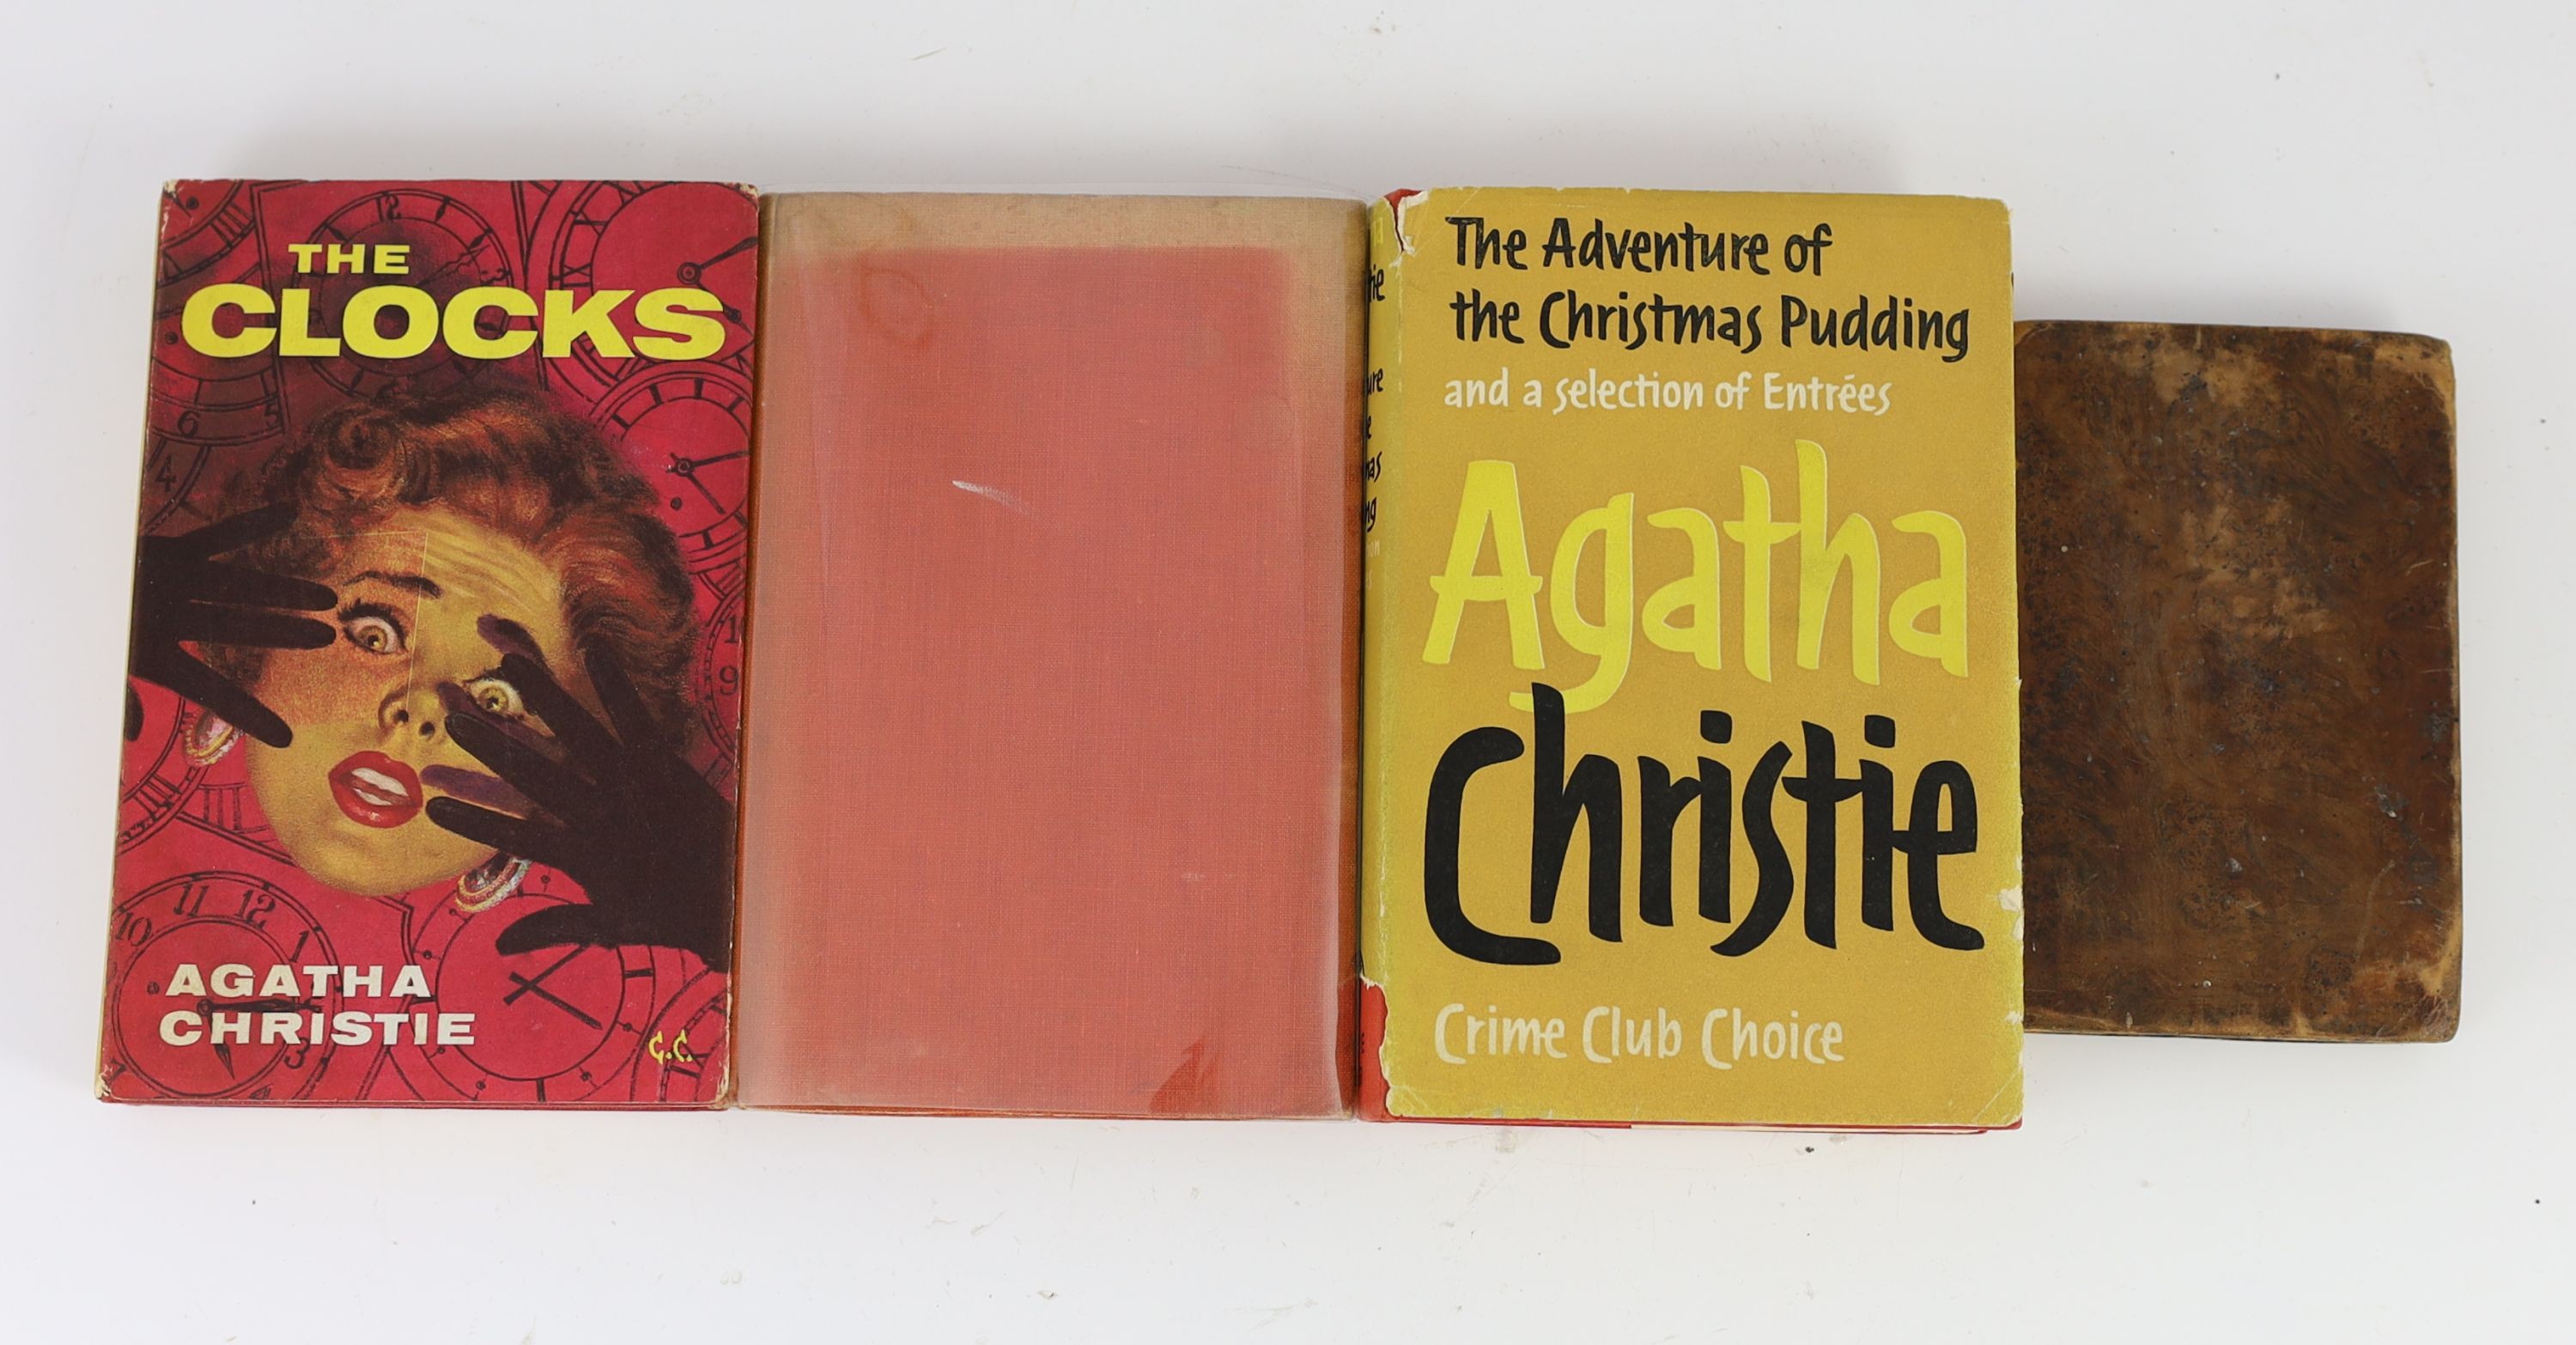 Christie, Agatha - 4 works - The Adventures of the Christmas Pudding and a Selection of Entrées, 1st edition